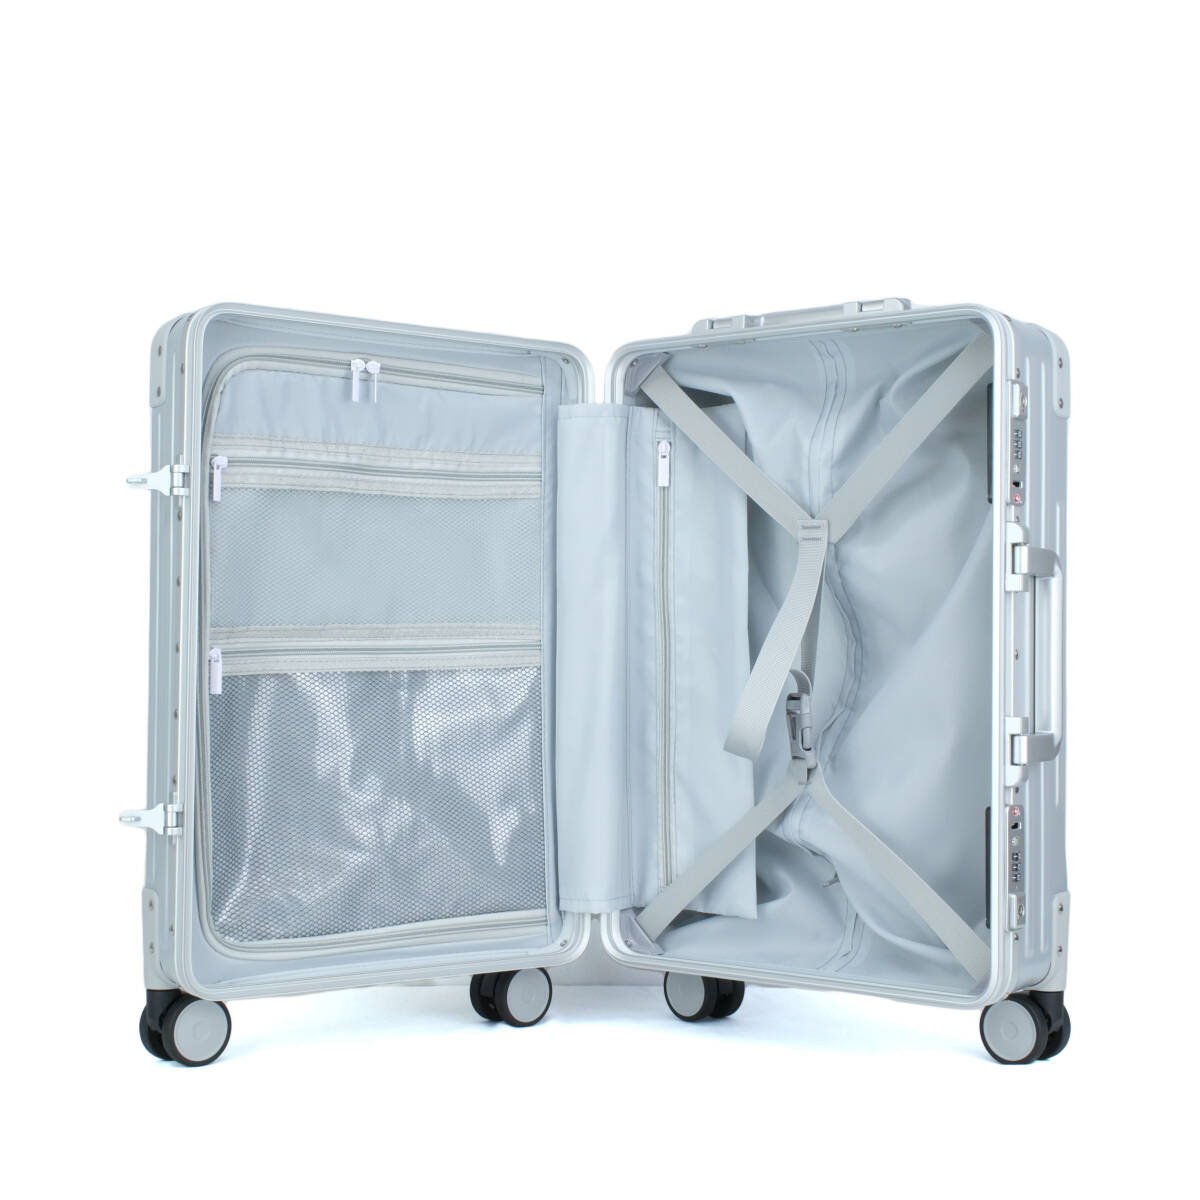  new goods cheap Carry case silver aluminium frame poly- car bone-toS size suitcase machine inside bringing in light weight strong carry bag 